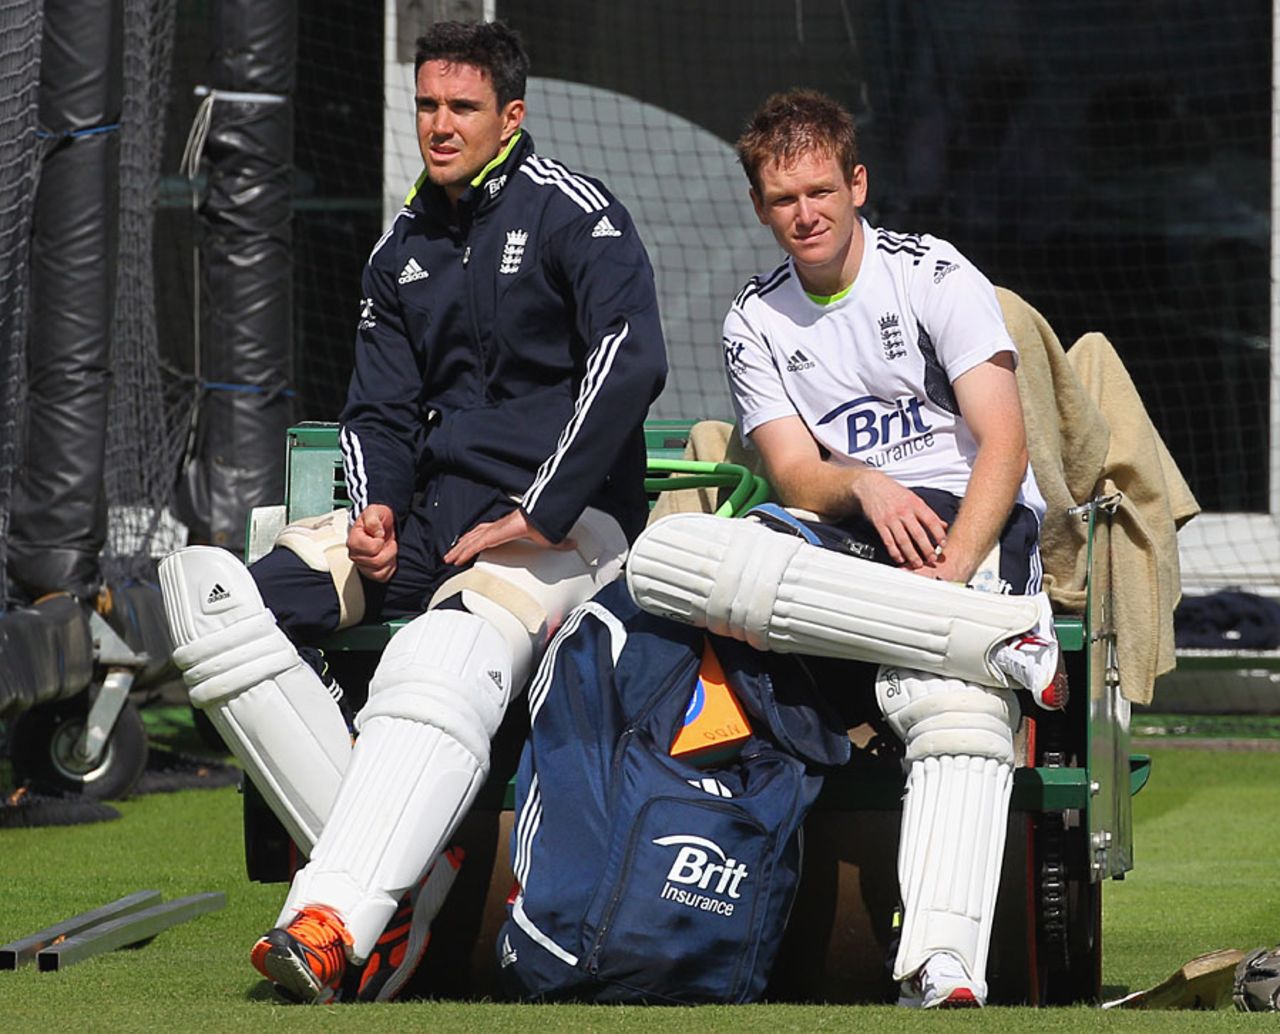 Kevin Pietersen and Eoin Morgan are both in need of runs after struggling in the third Test, Lord's, August 24, 2010